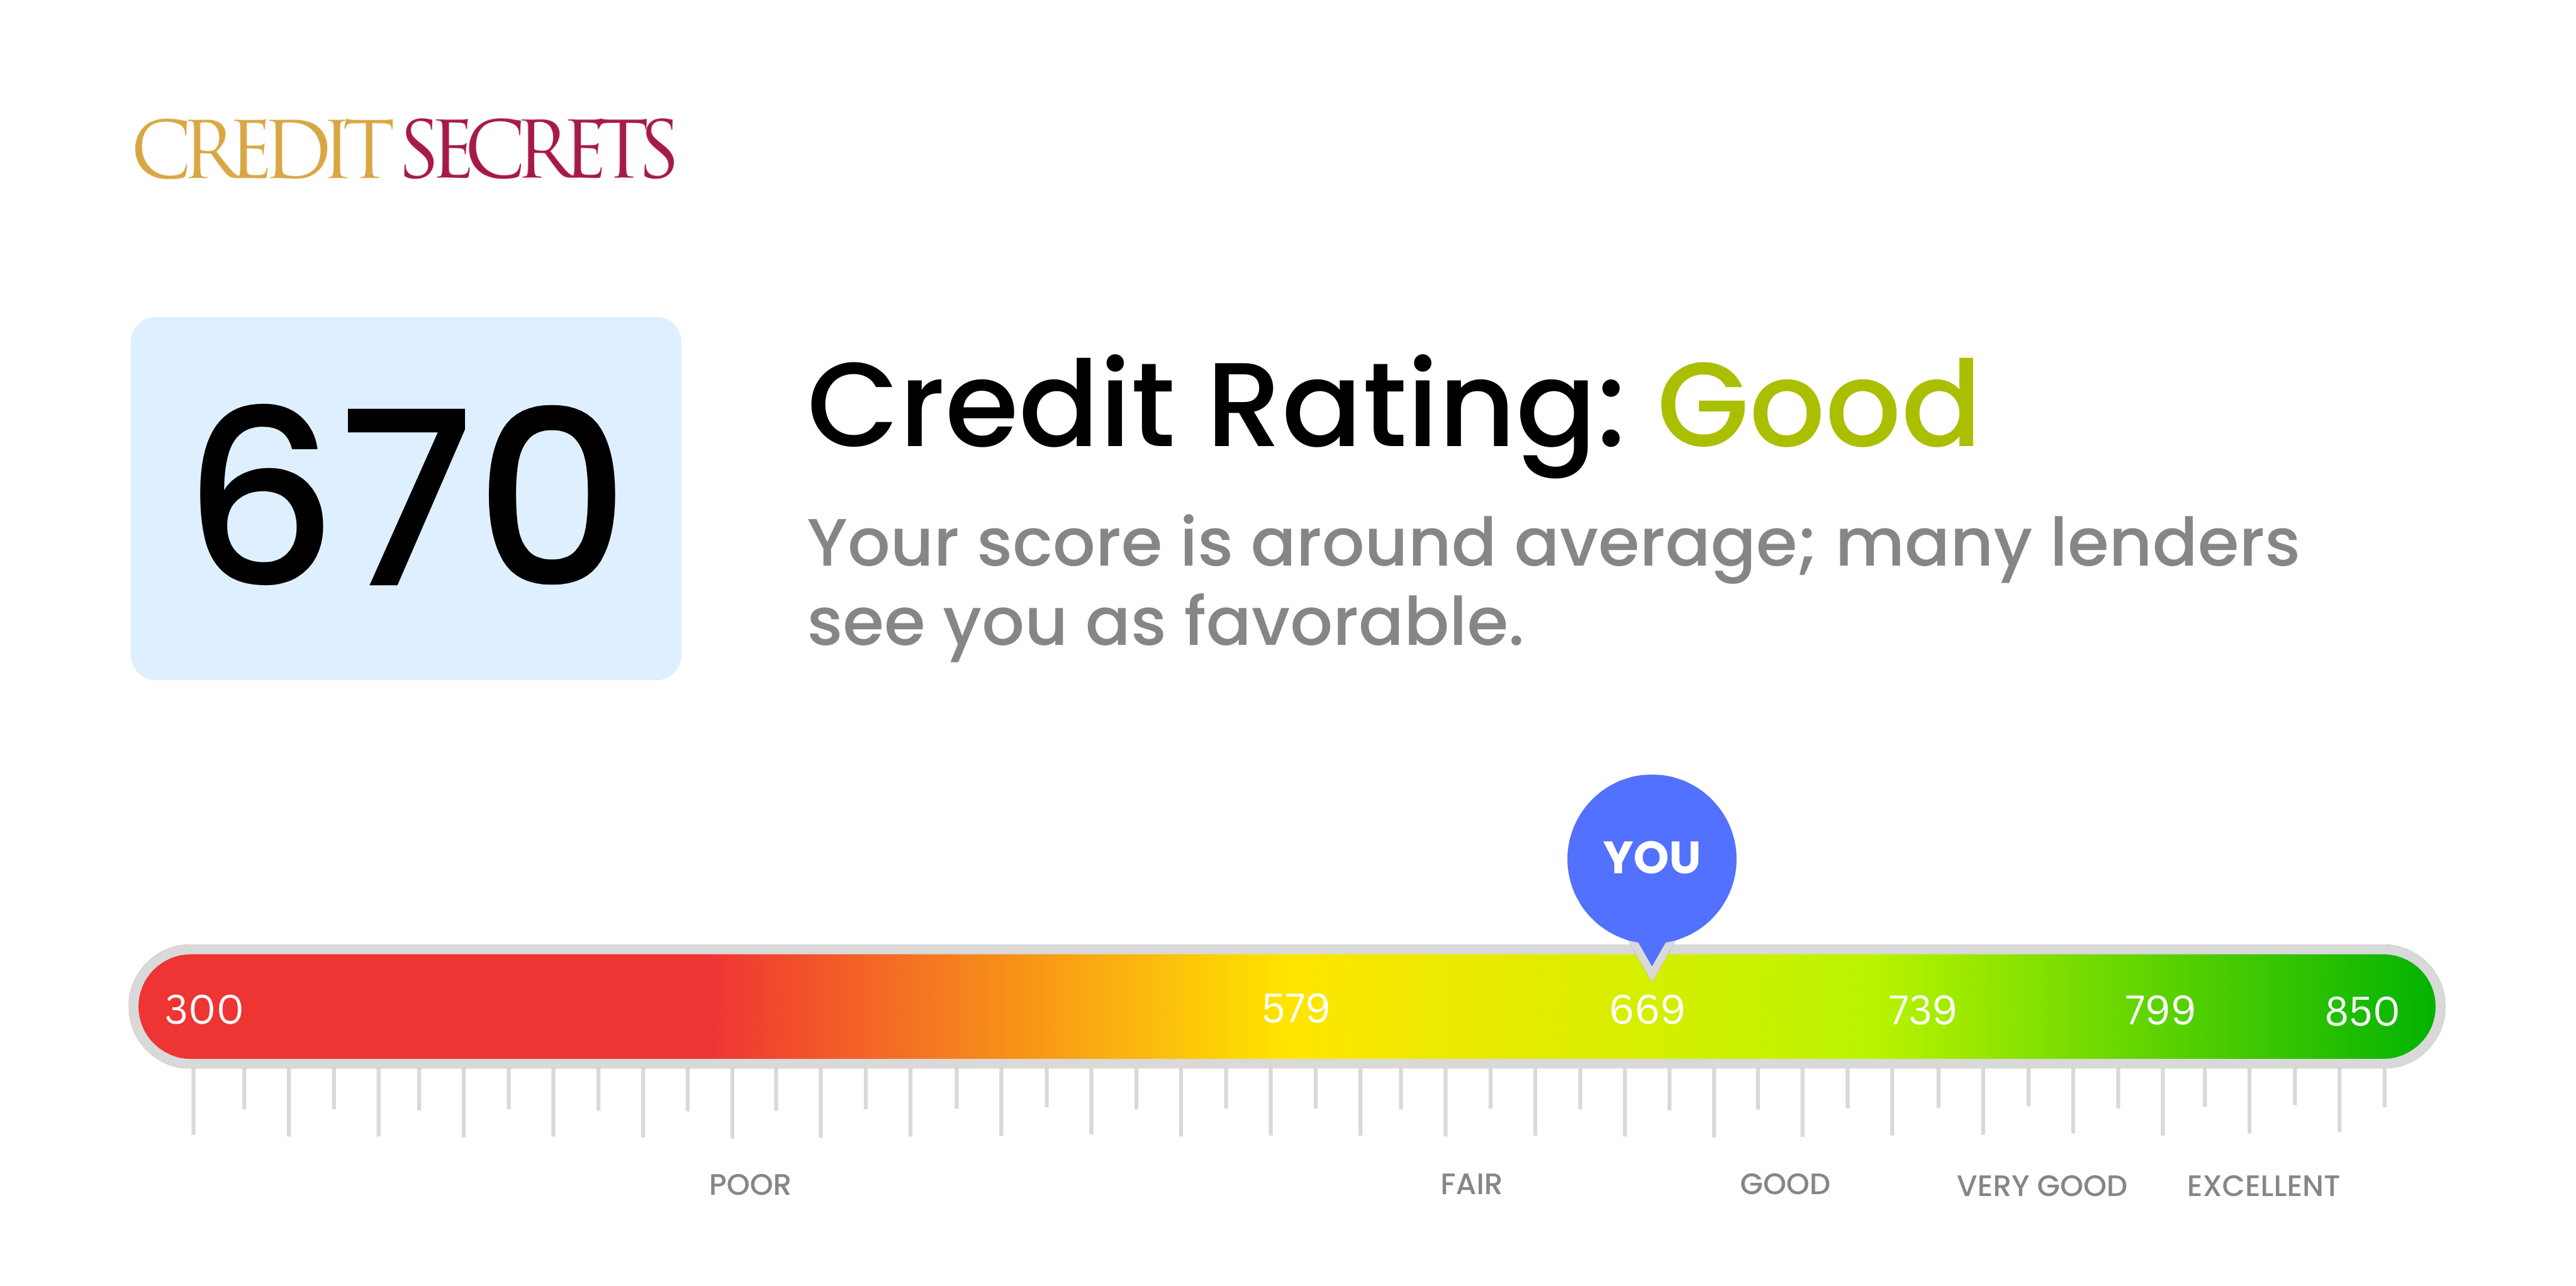 Is 670 a good credit score?